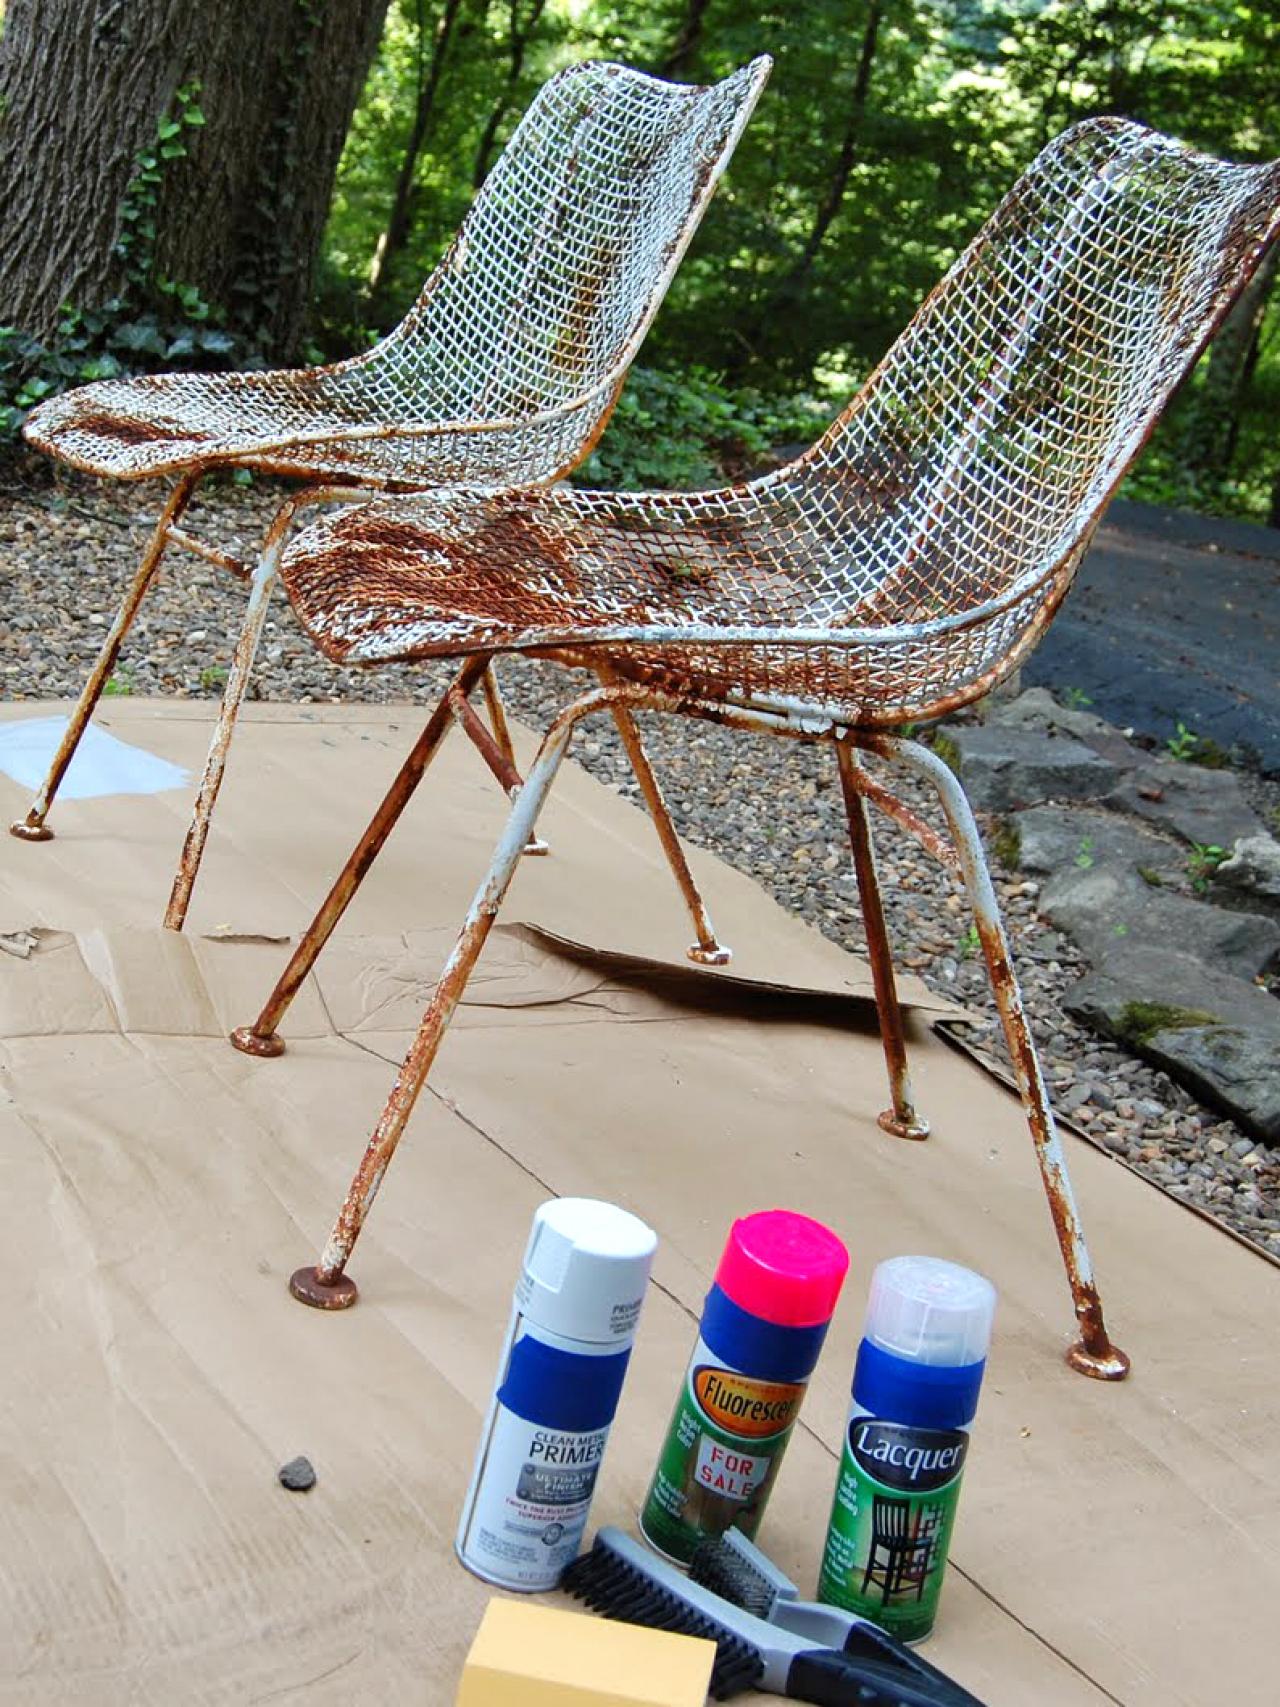 How To Paint Metal Chairs Tos Diy, Best Paint For Rusty Metal Garden Furniture